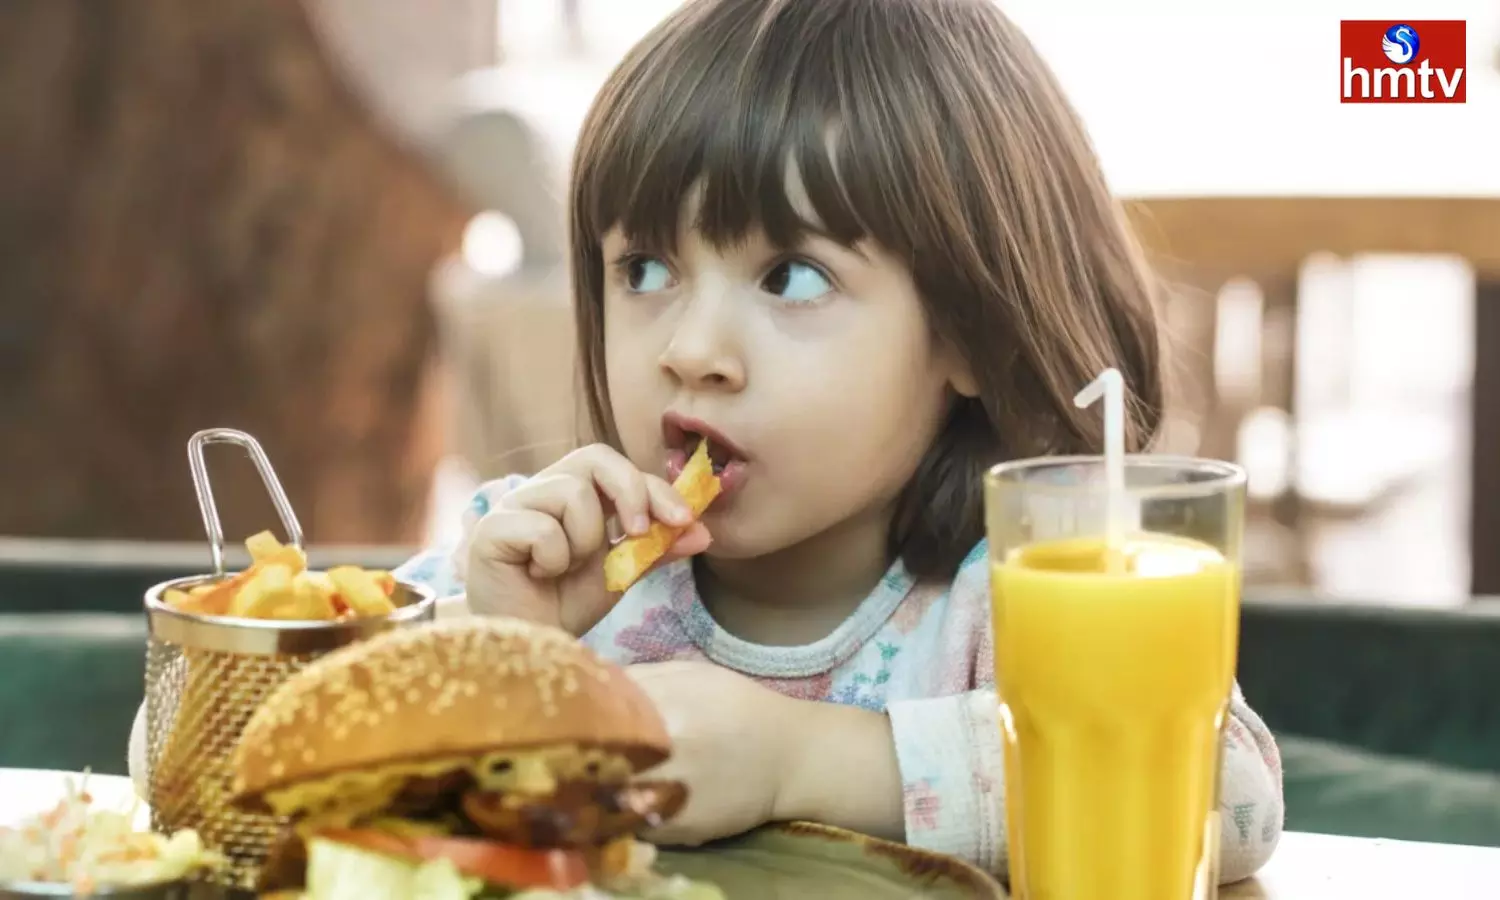 Are you feeding these junk foods to children they are damaging them from the inside